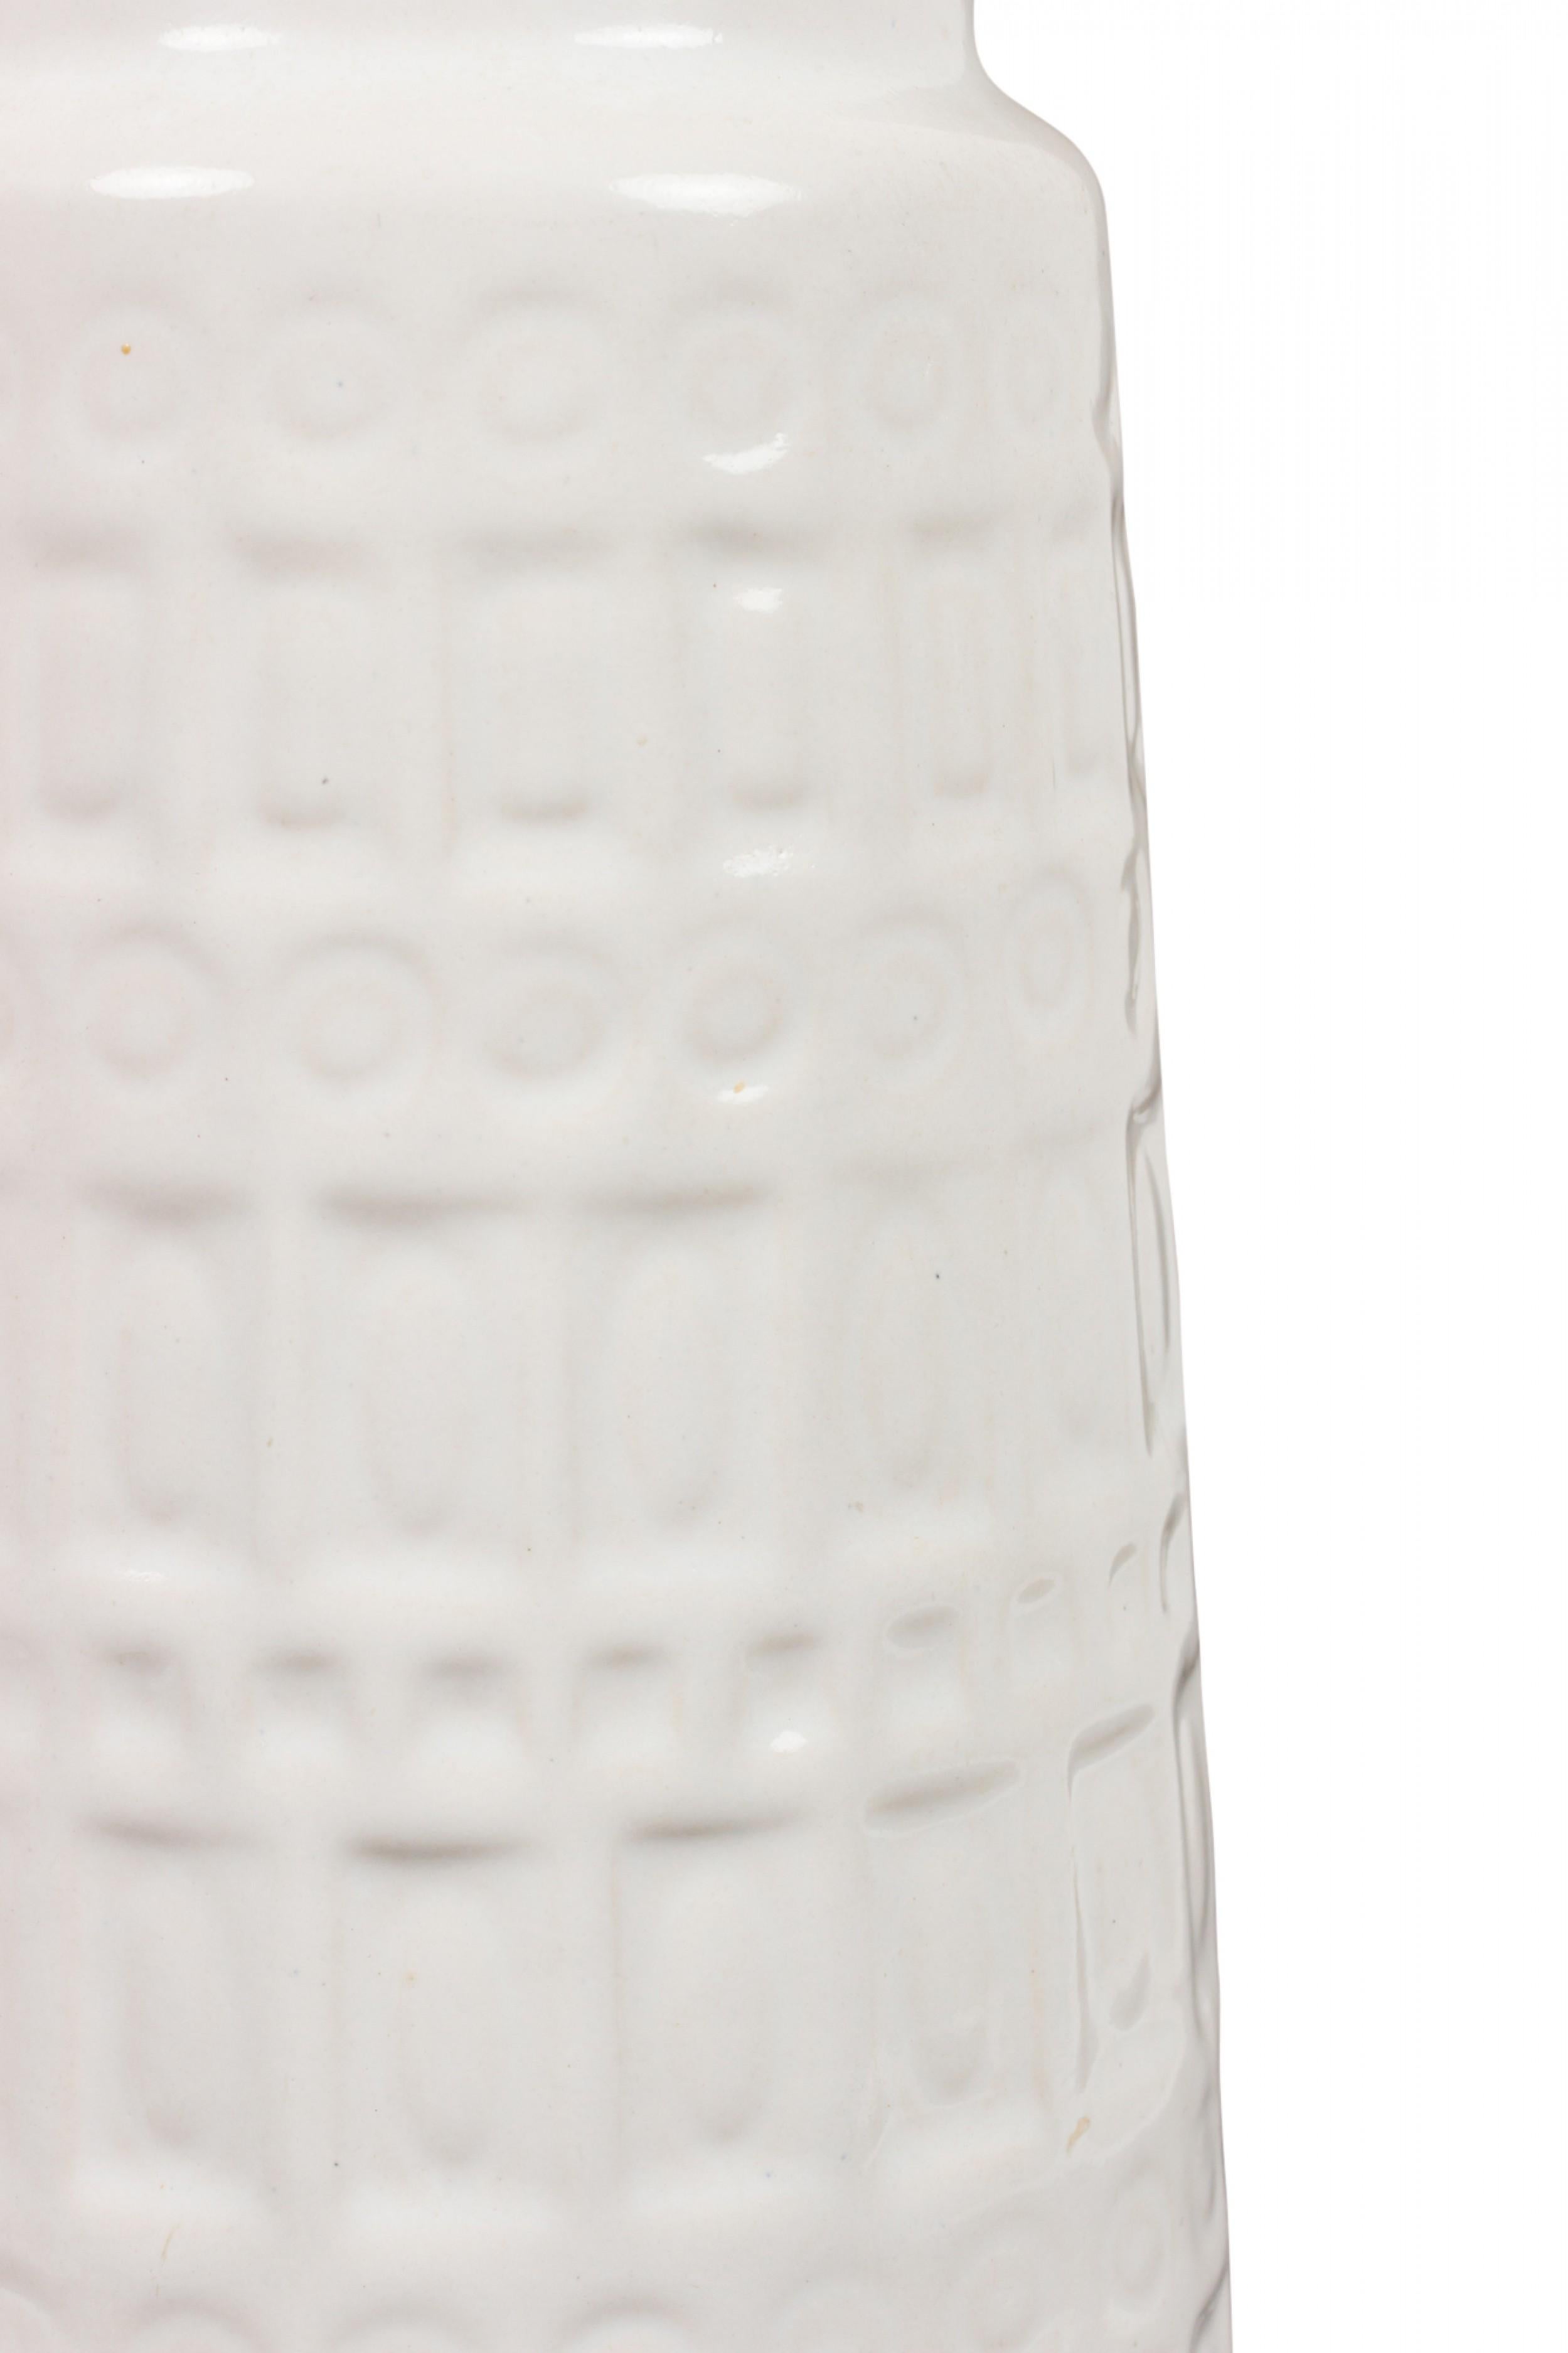 Scheurich Keramik West German White Ceramic Vase In Good Condition For Sale In New York, NY